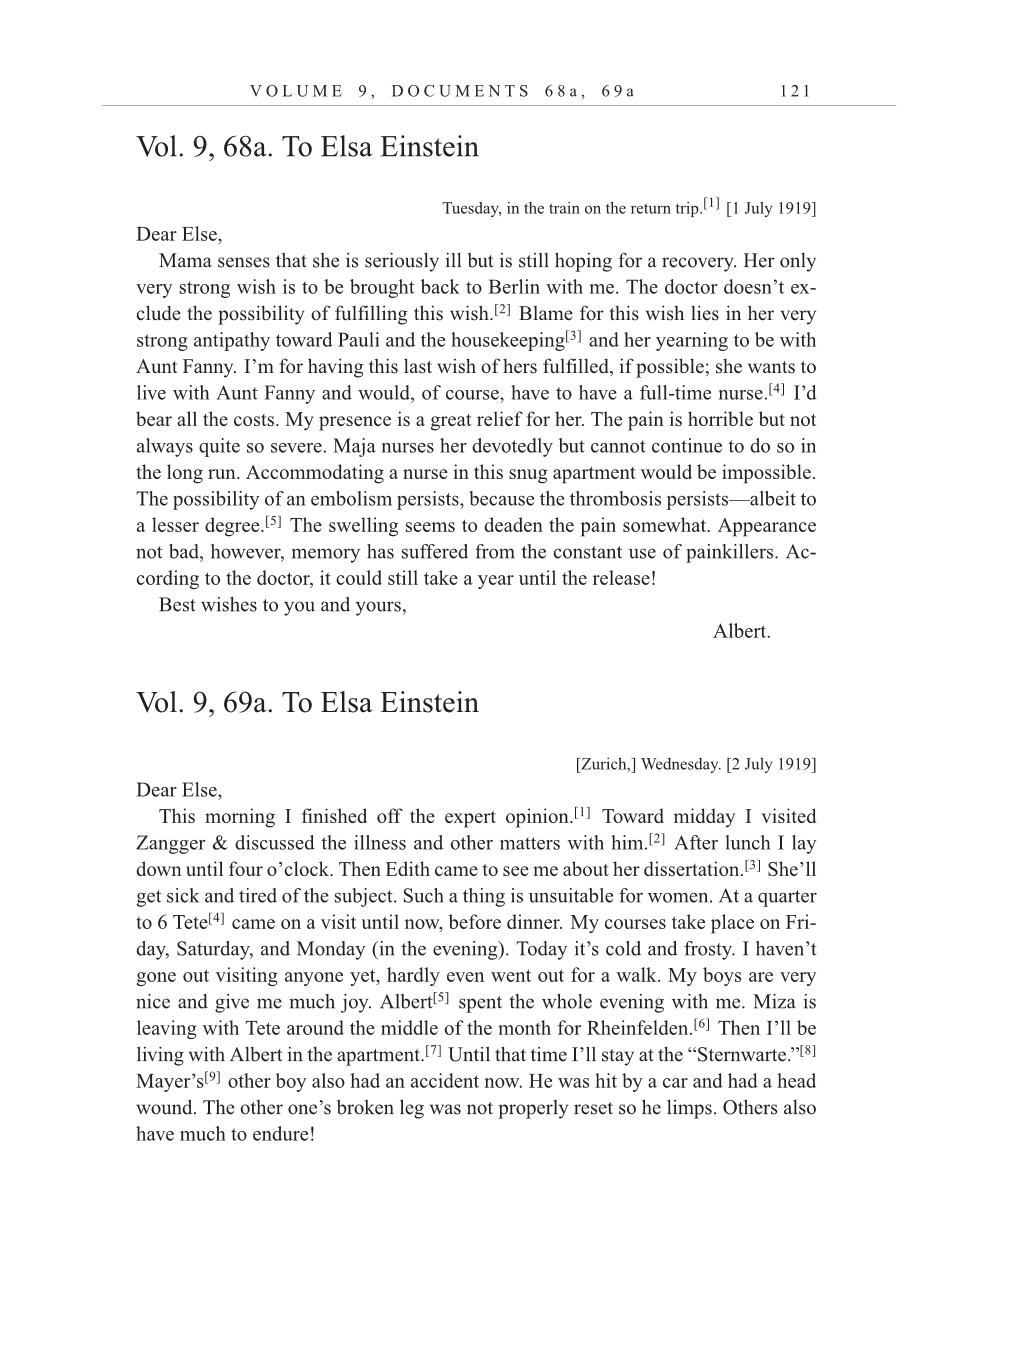 Volume 10: The Berlin Years: Correspondence, May-December 1920, and Supplementary Correspondence, 1909-1920 (English translation supplement) page 121